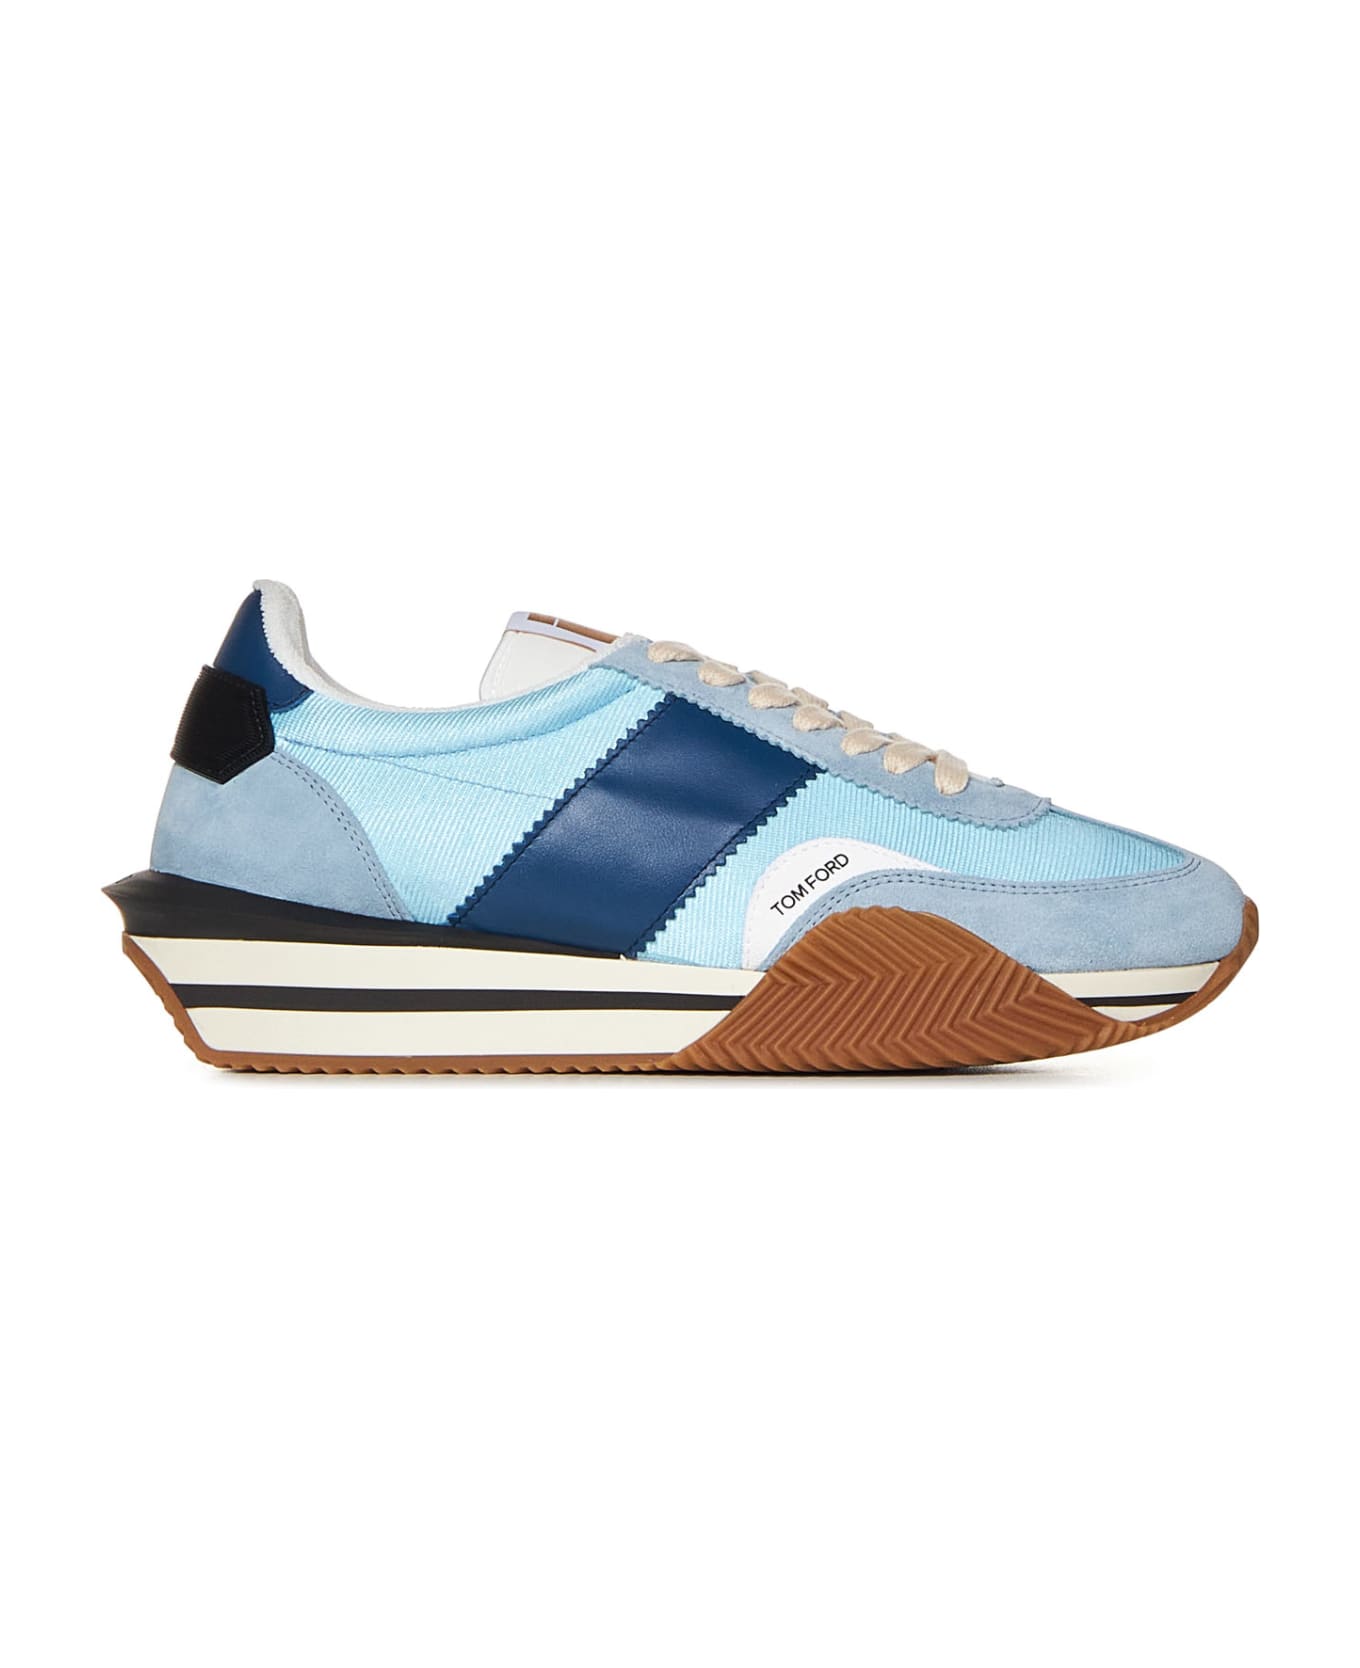 Tom Ford James Sneakers - Light blue